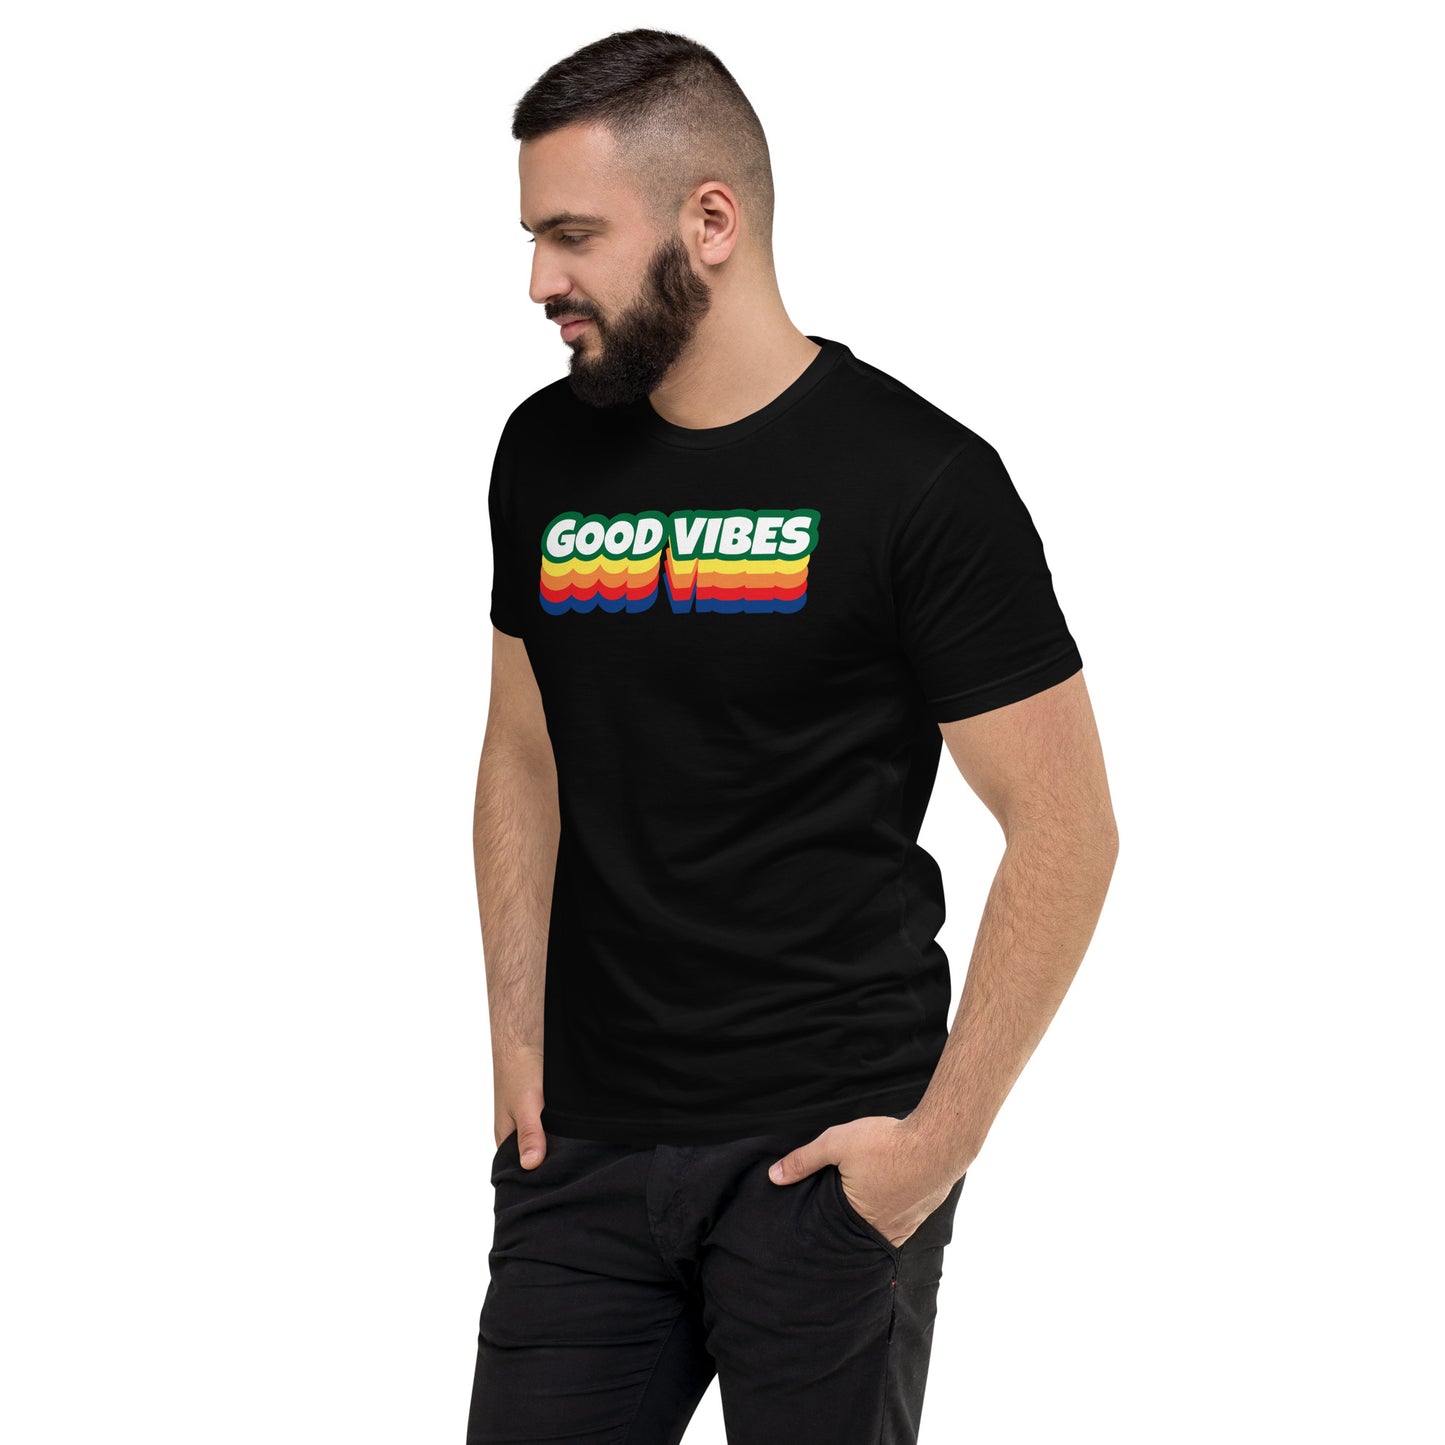 Men's Good Vibes Graphic Form-fitting T-shirt